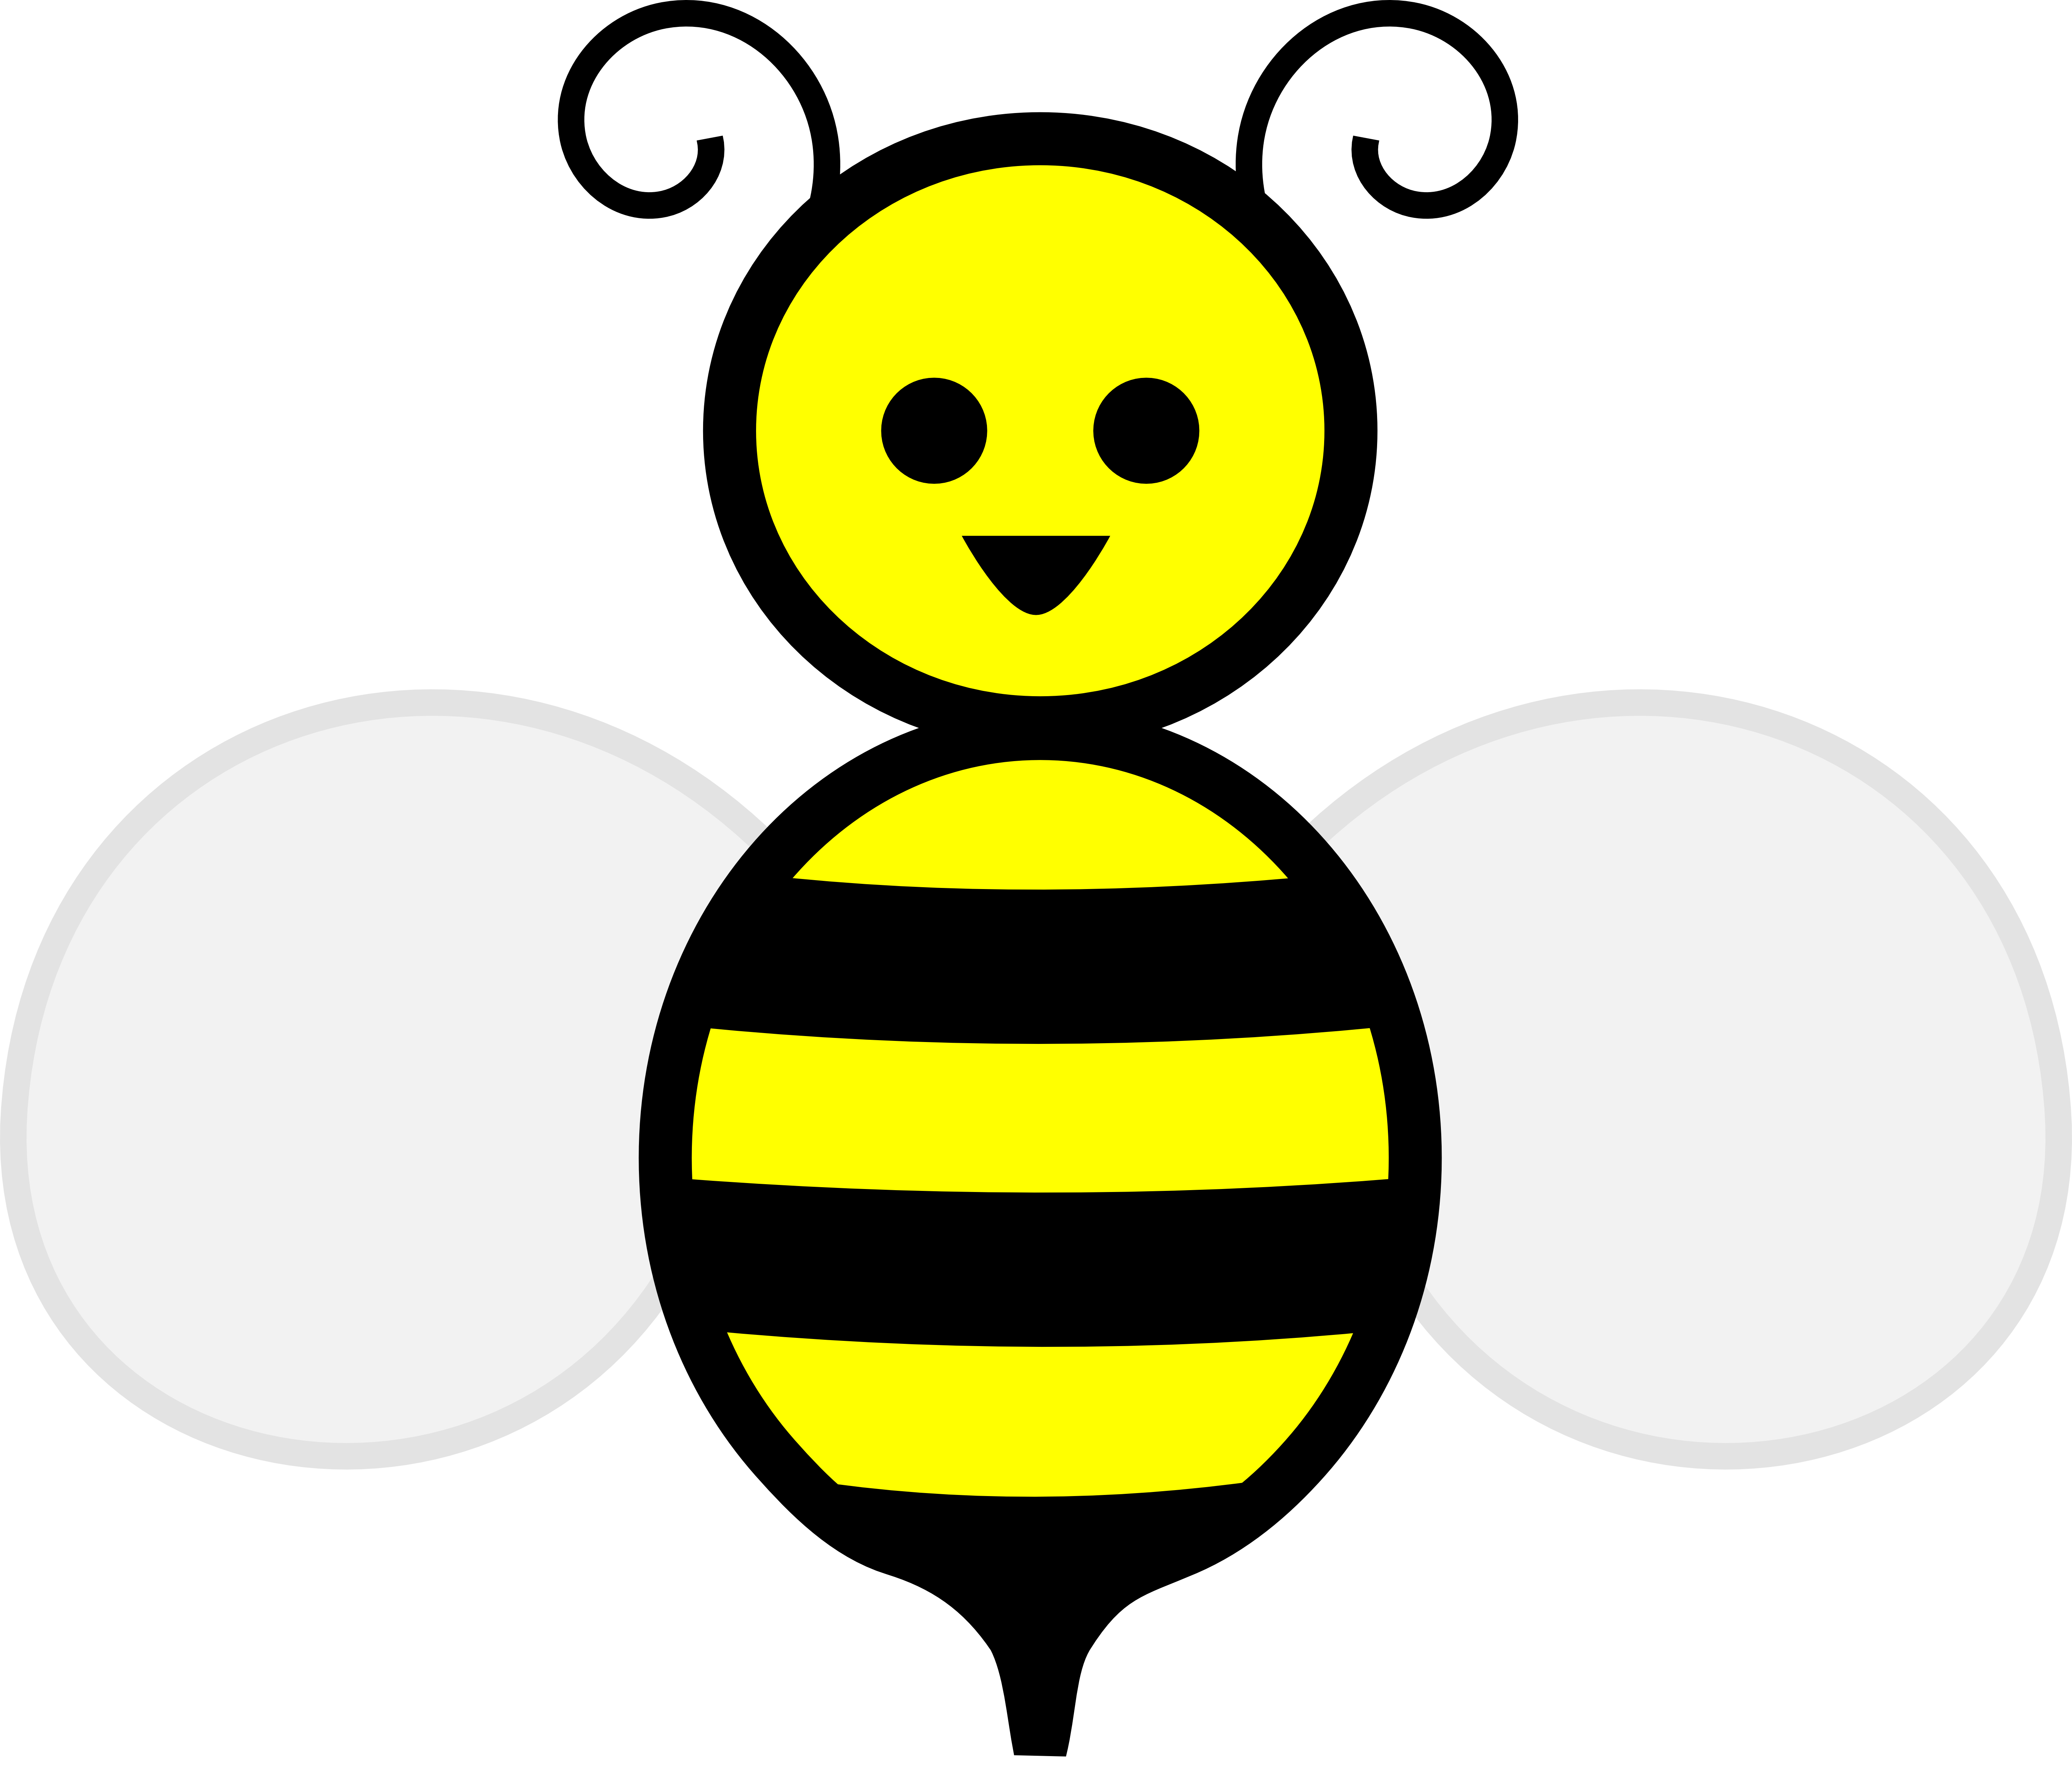 Bumblebee clipart august.